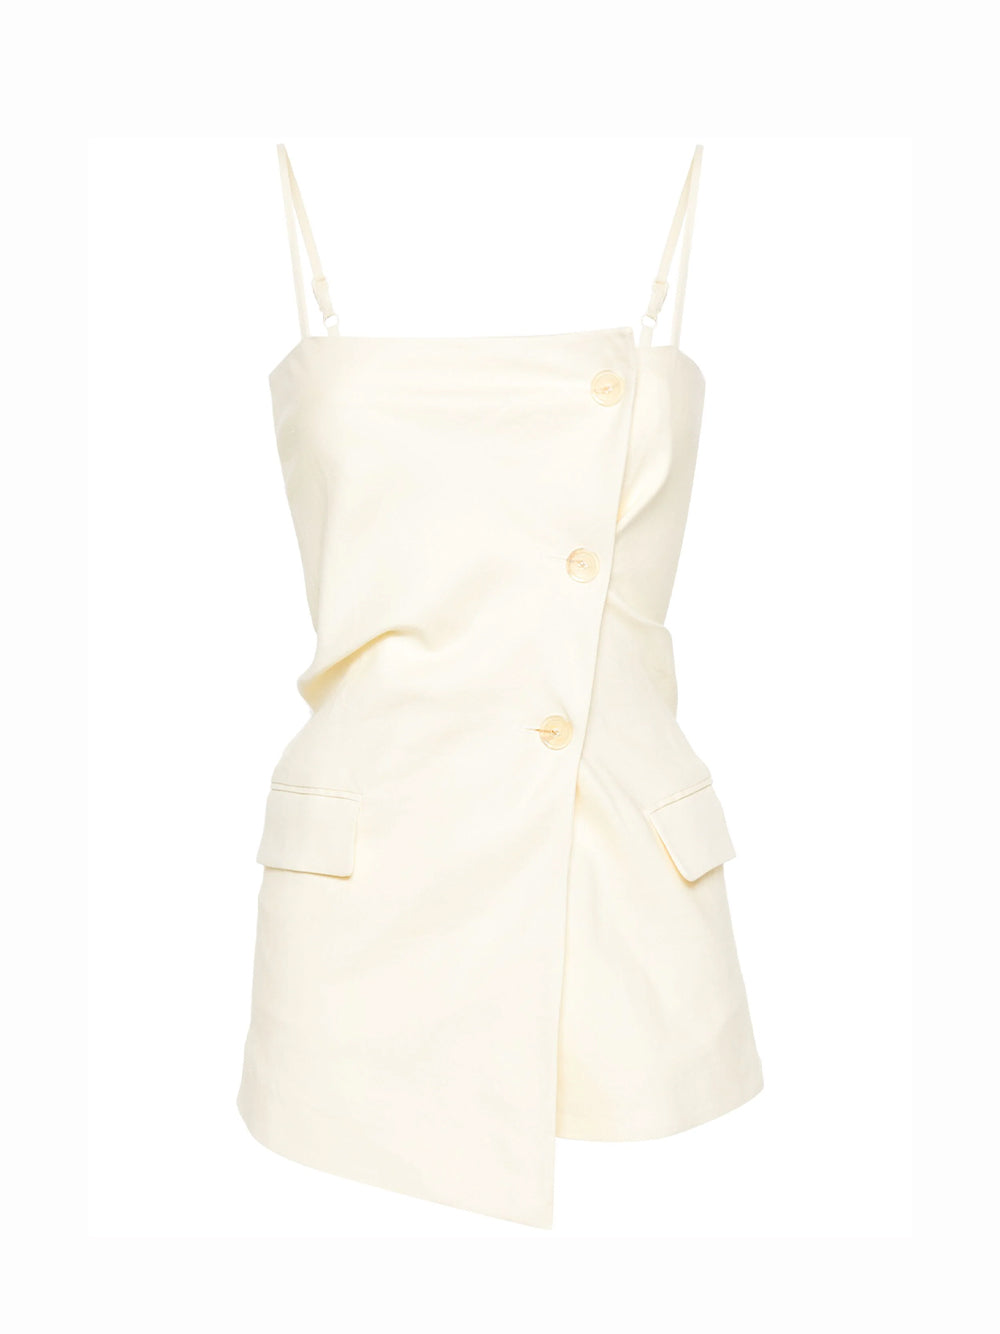 Strap Suit Top (Soft Yellow)